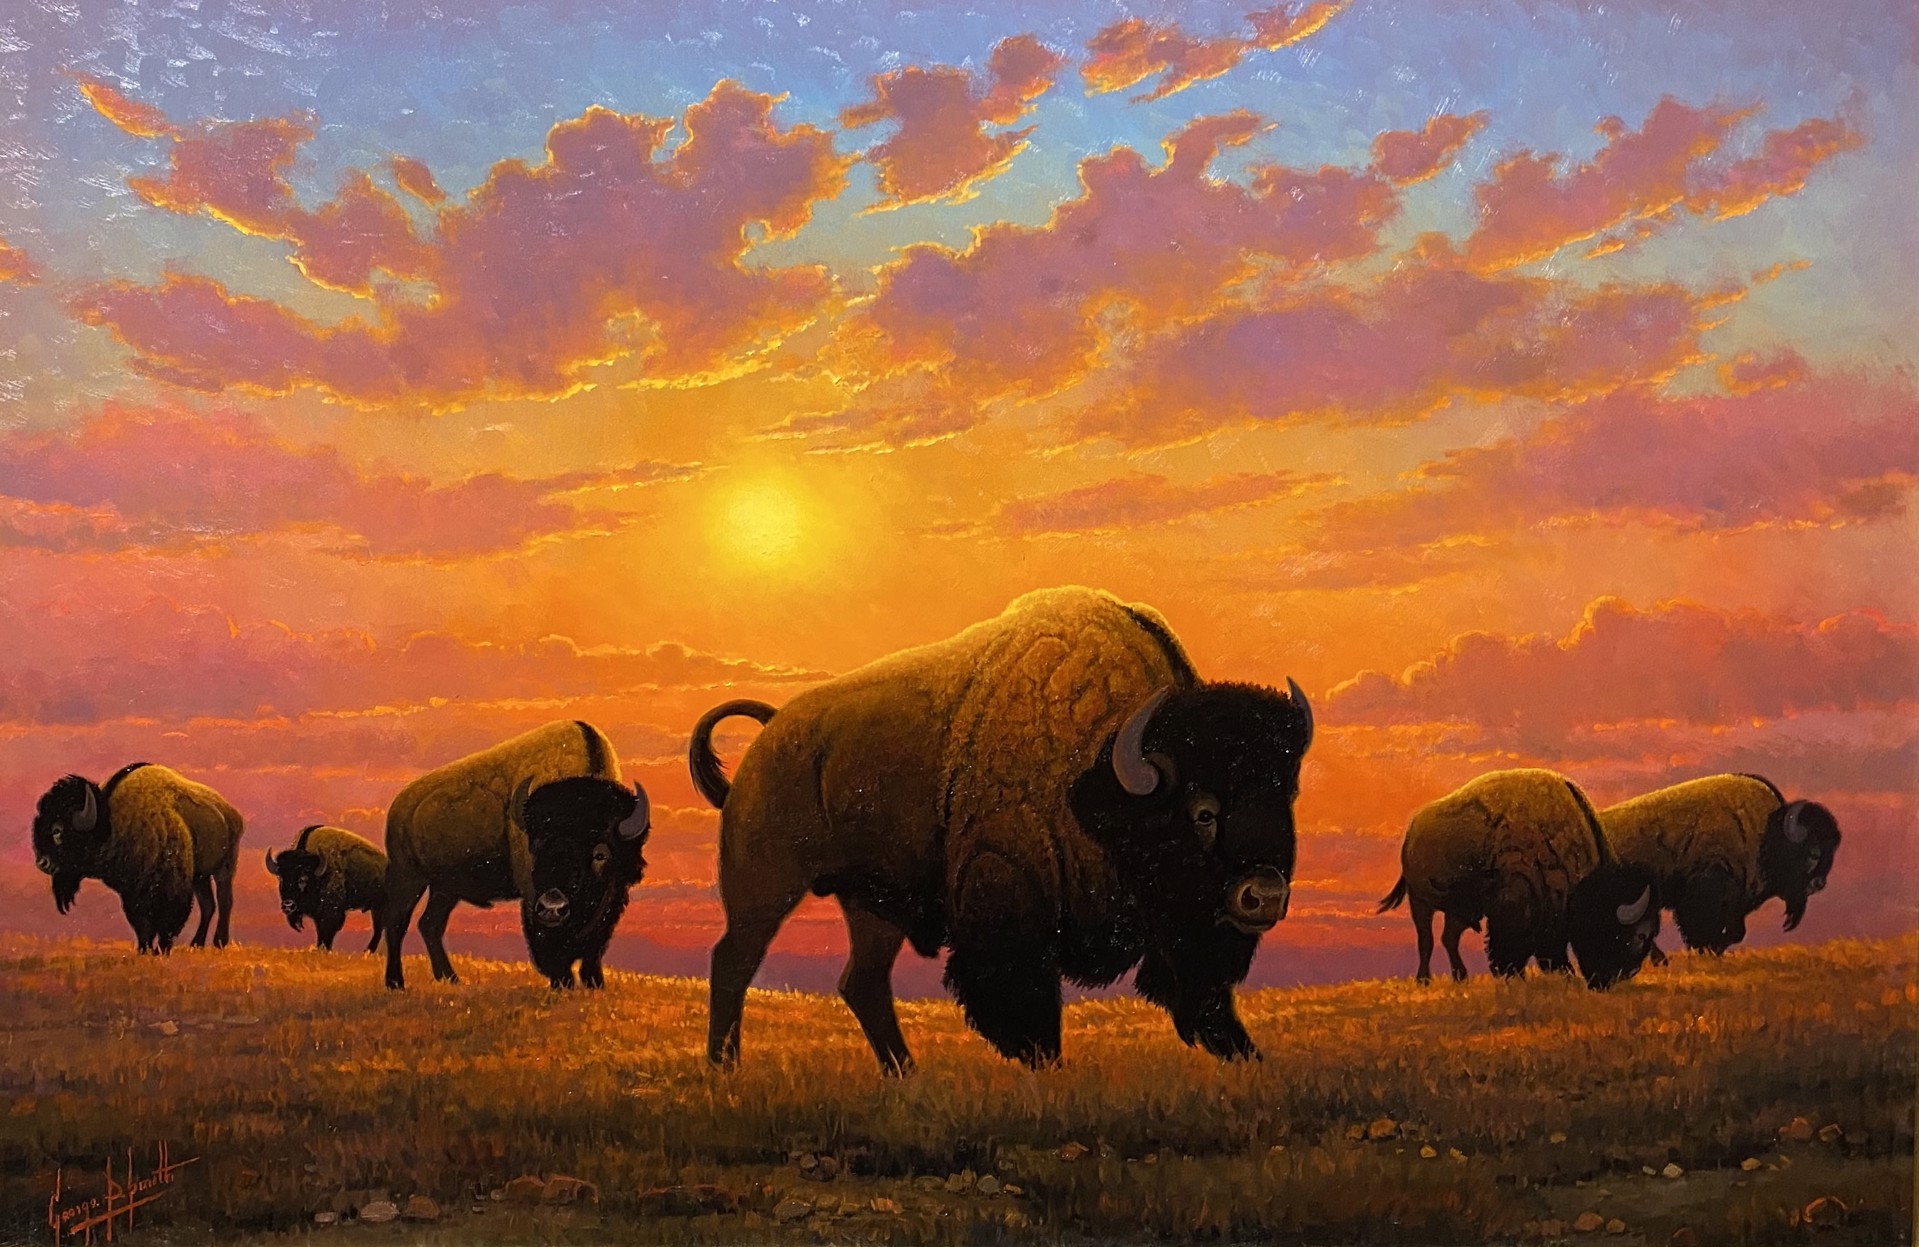 BUFFALO AT DAYS END by George "Dee" Smith